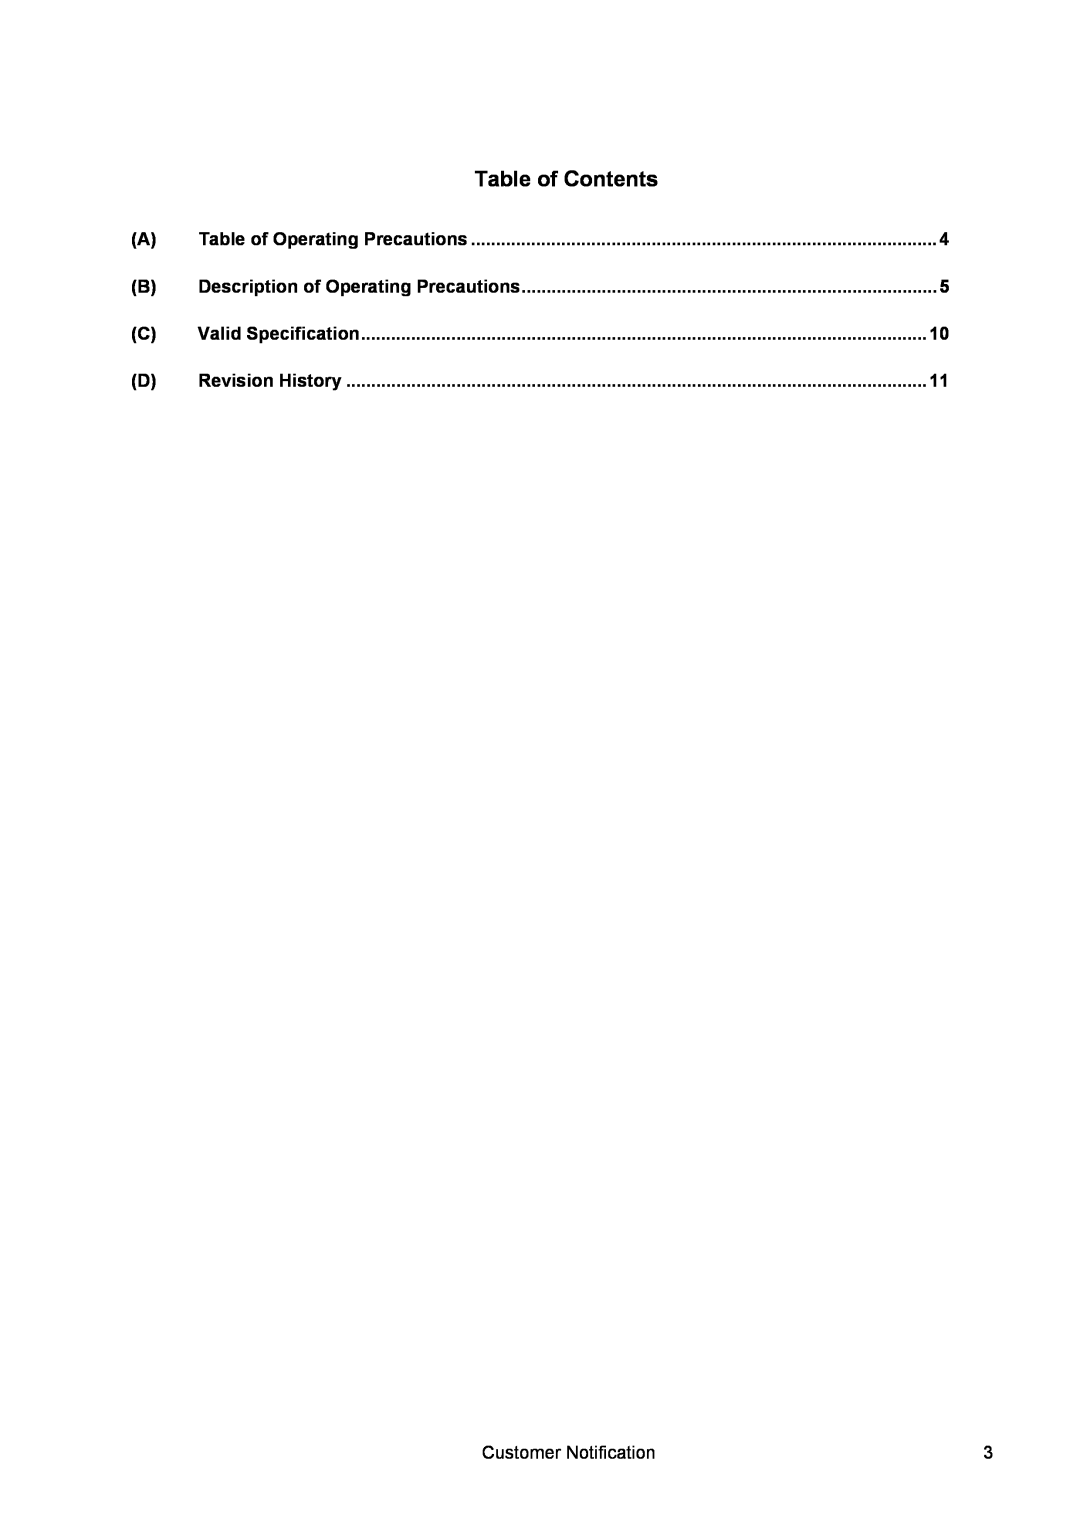 NEC VR4133 Table of Contents, Table of Operating Precautions, Description of Operating Precautions, Valid Specification 